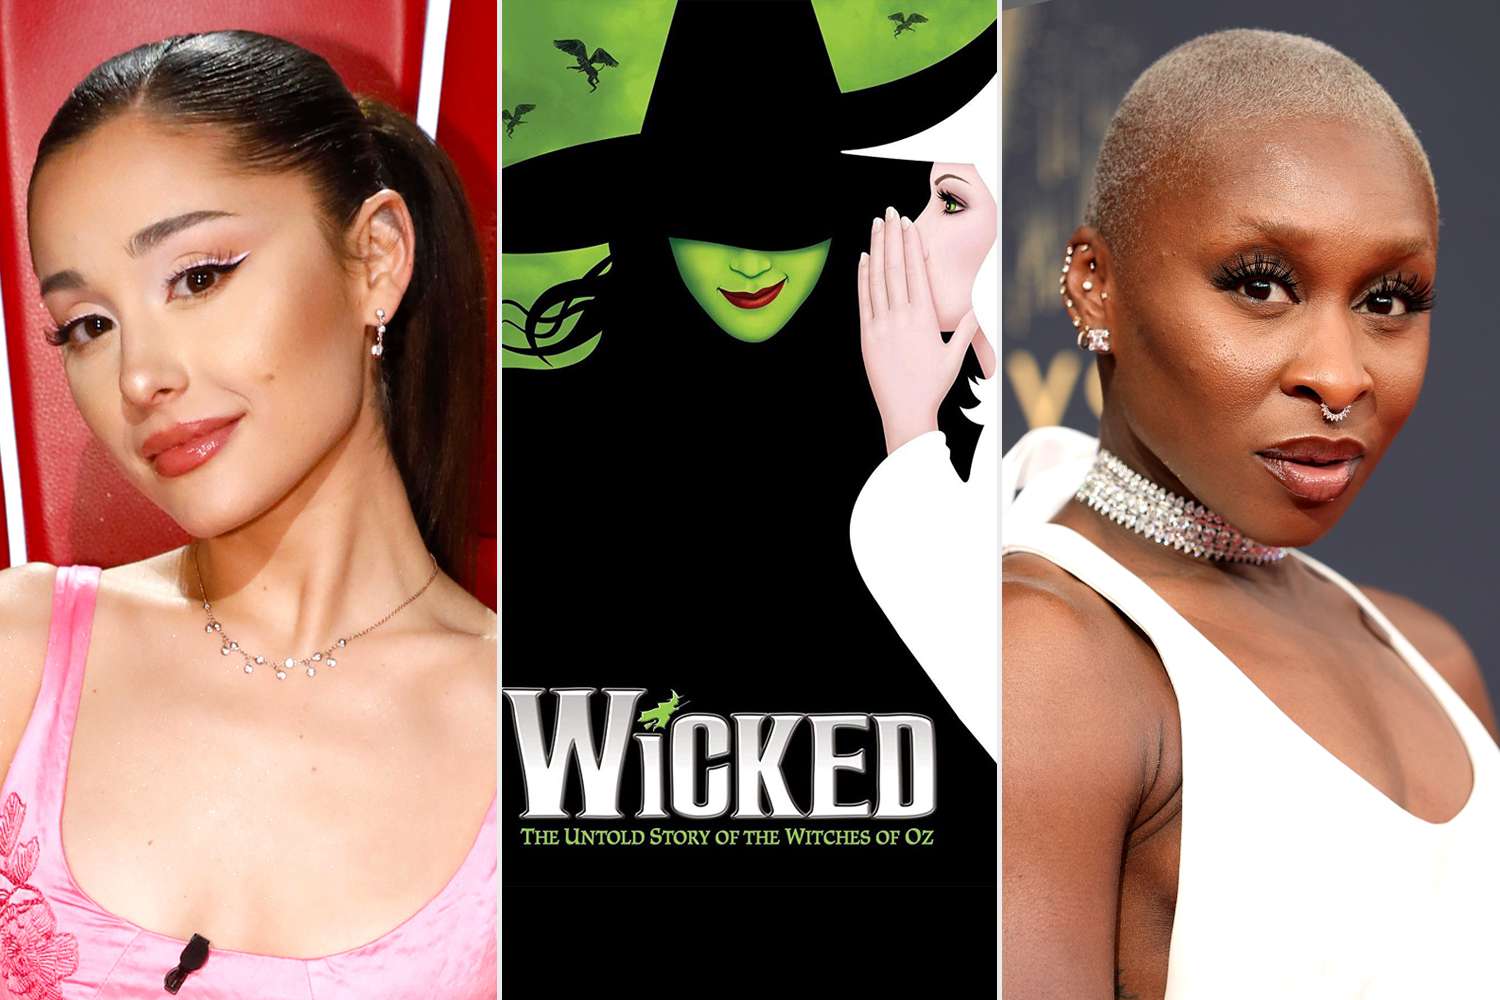 Behind the Scenes How 'Wicked' Overcame Delays to Finally Land a Movie Deal